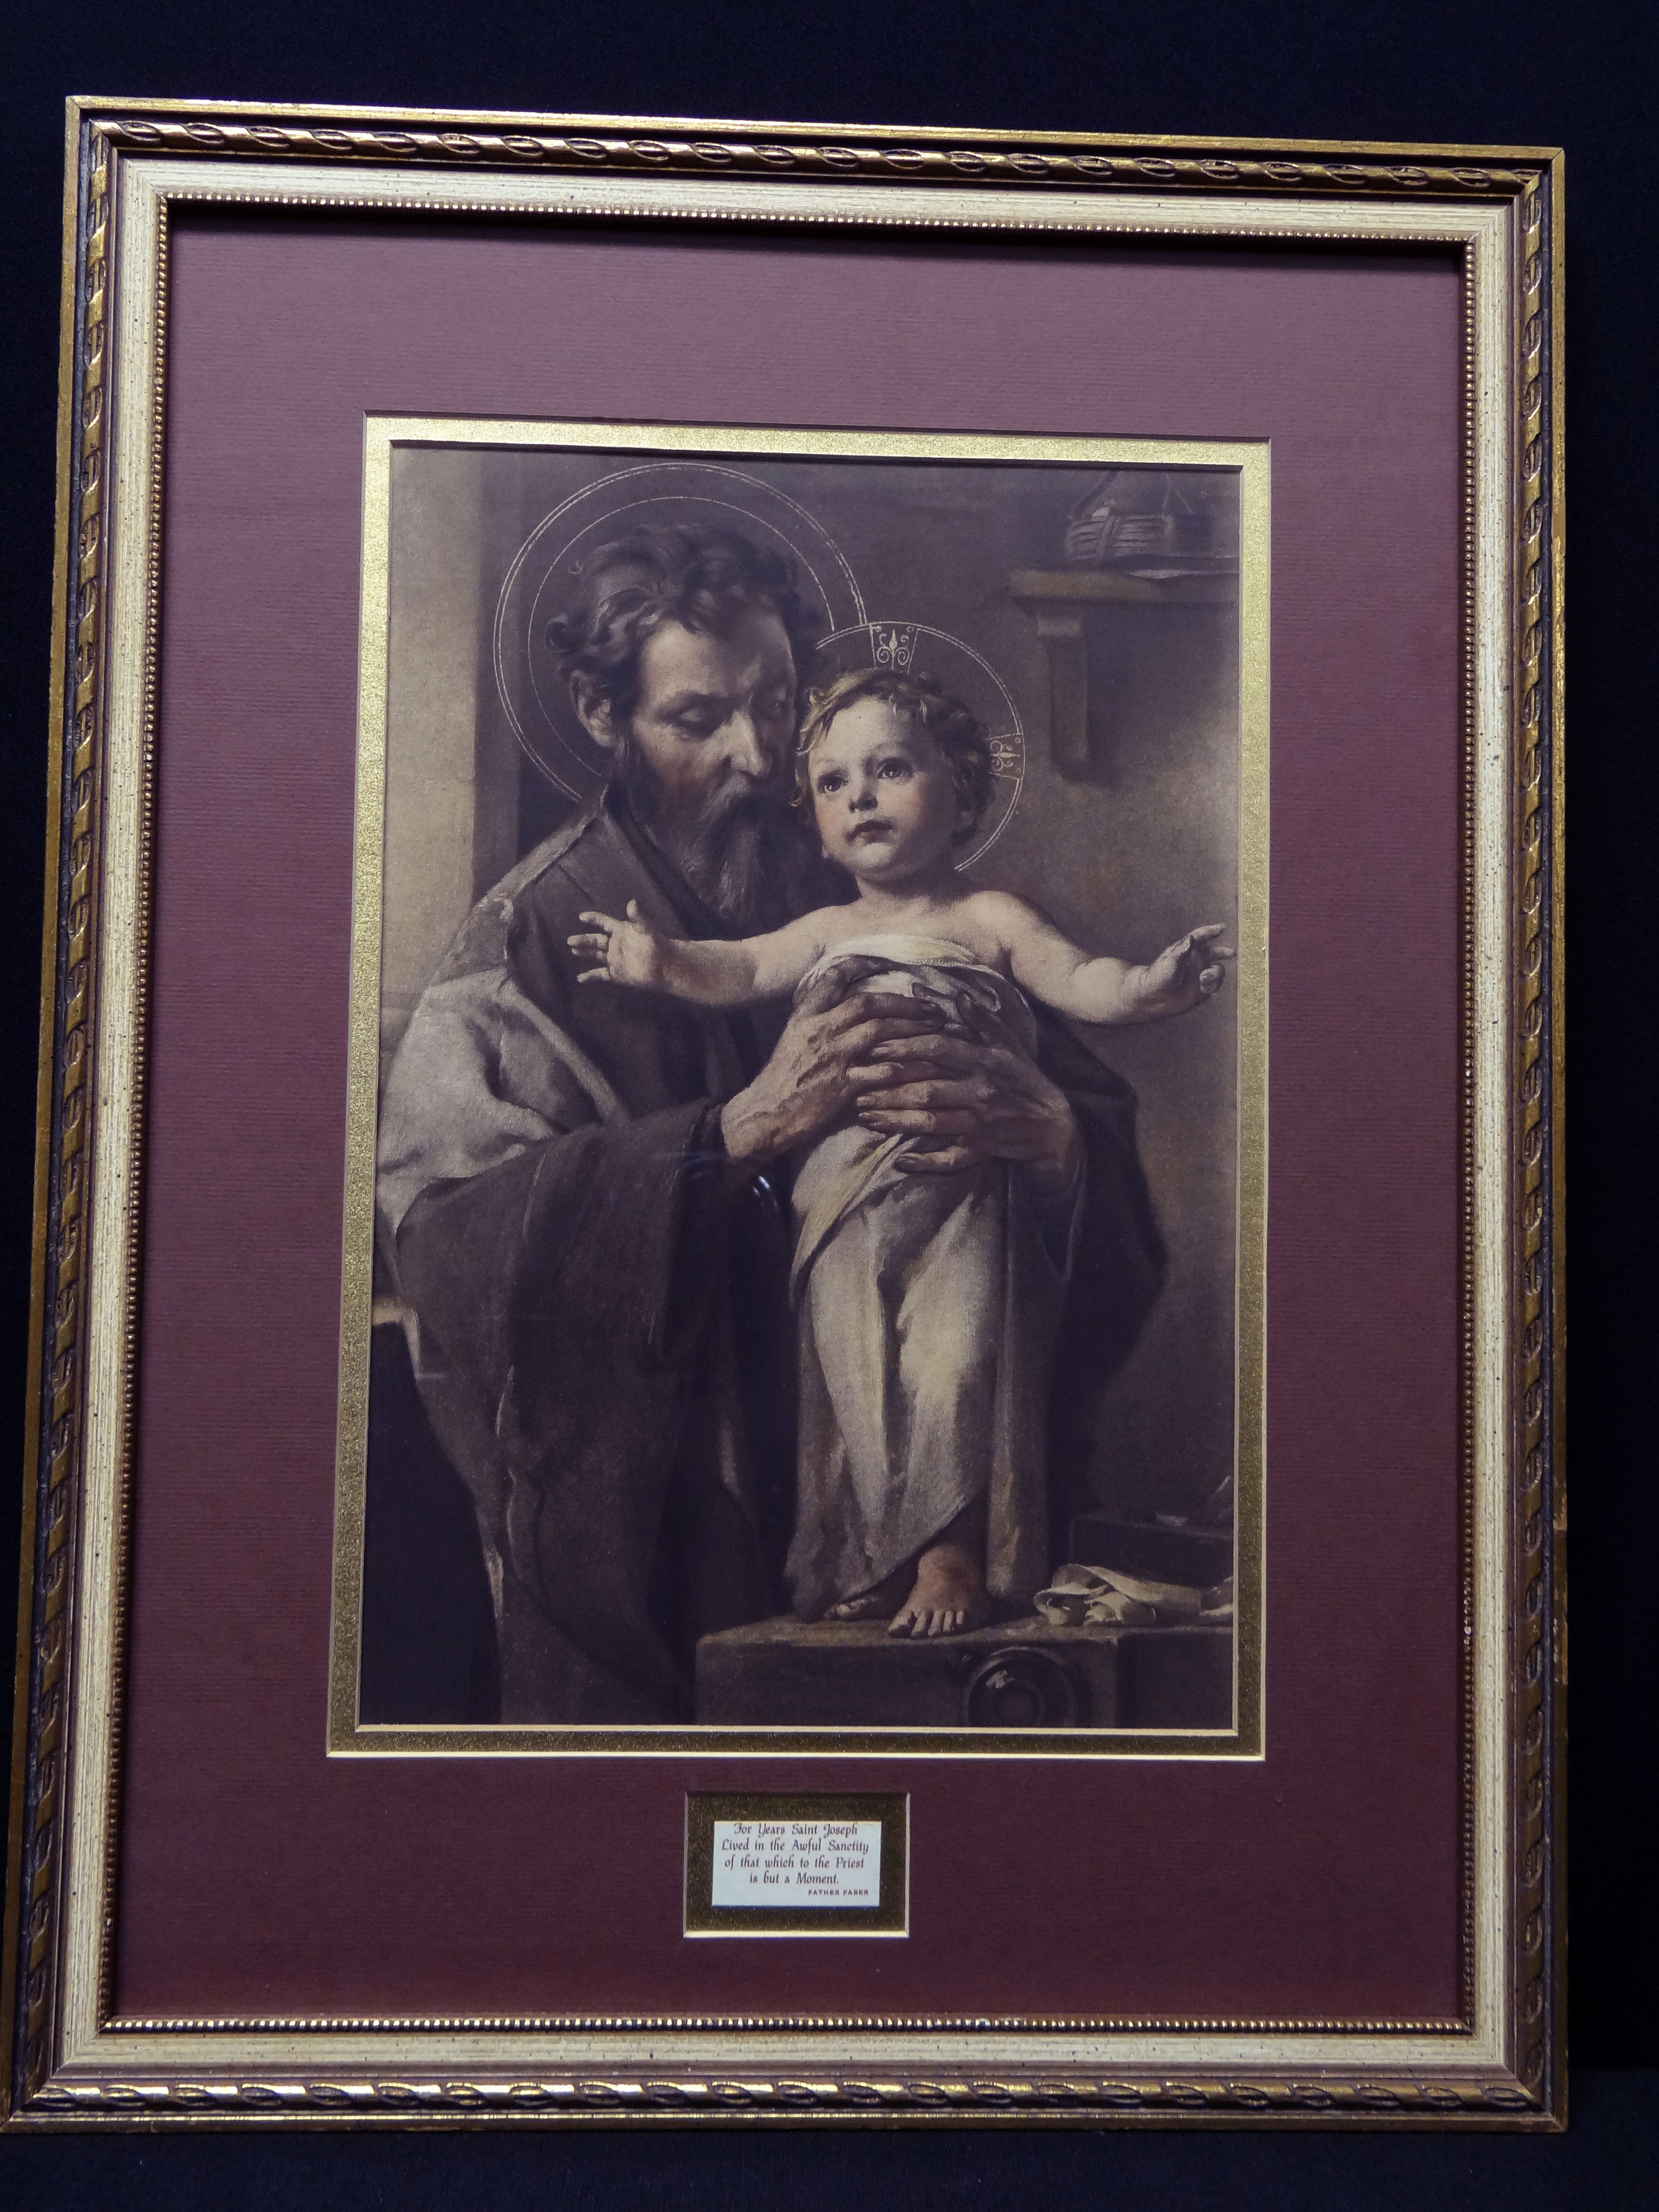 Saint Joseph holding the Child Jesus, whose arms are outstretched, up near his cheek. Child is swaddled. Both have halos.